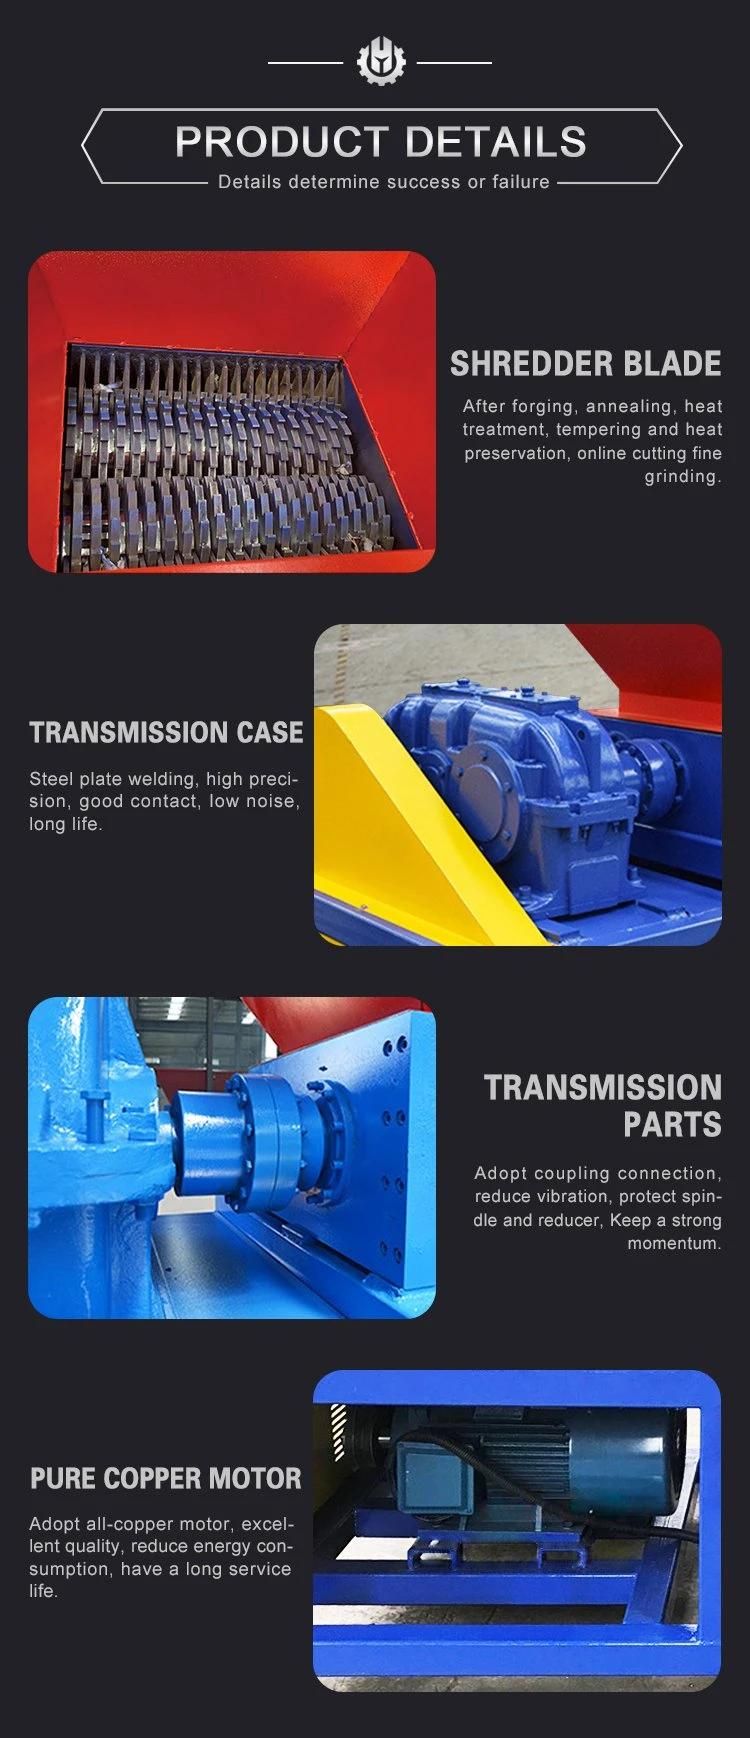 Double Shaft Shredder/Shredder Machine for Recycling Used Tires/Plastic/Wood Used in Plastic Recycling Line/Plastic Recycling Machine